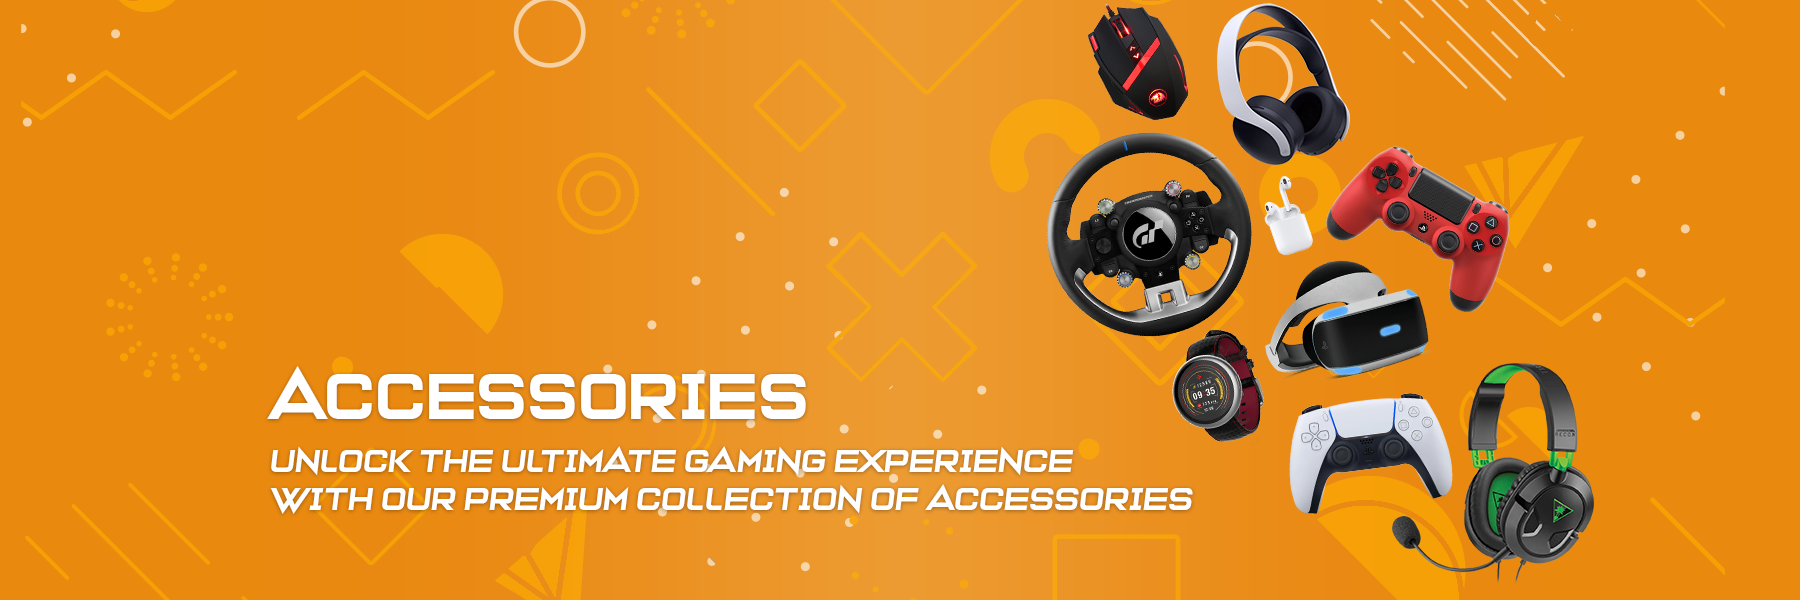 gaming and mobile phone accessories at gamexp